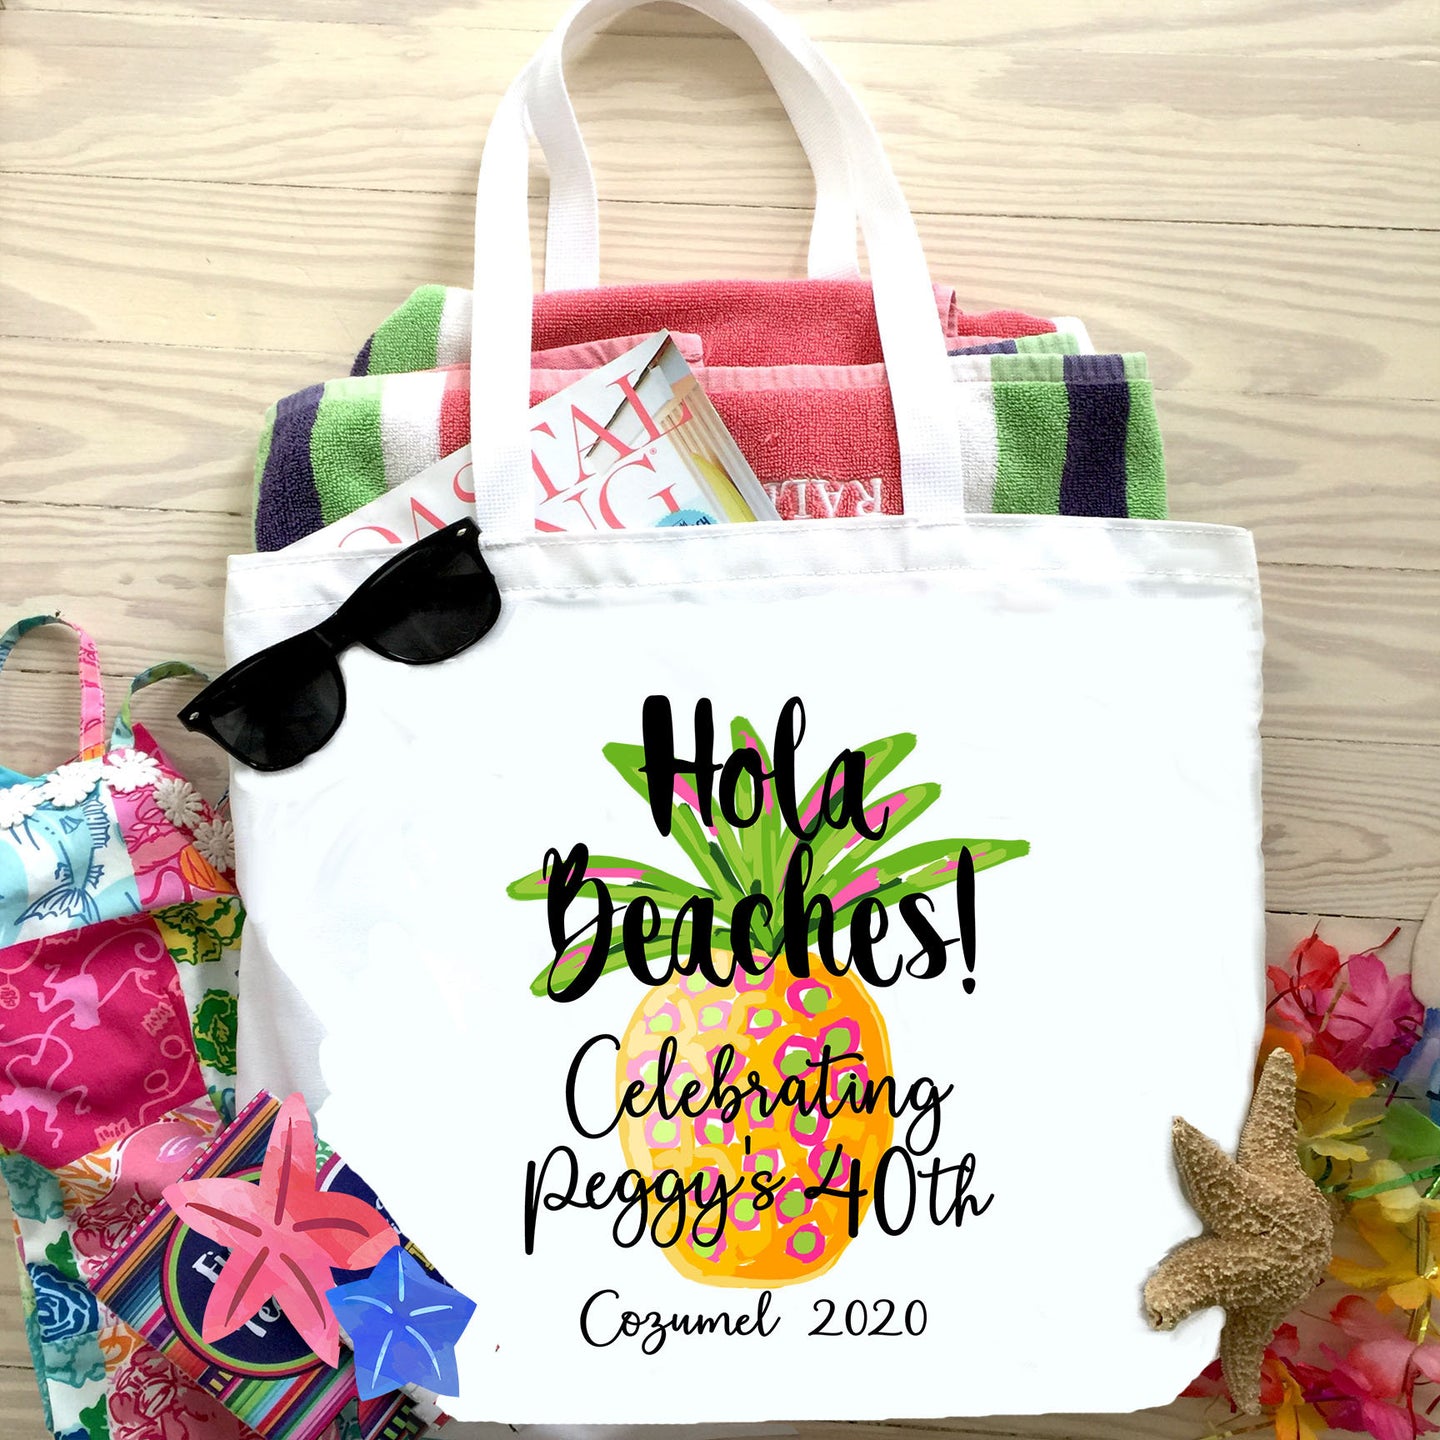 Pineapple Large Tote bag. Bachelorette or Birthday Tote Bag. Pineapple Party Beach Tote. Girls Weekend Beach Bag! Great Vacation Favors!